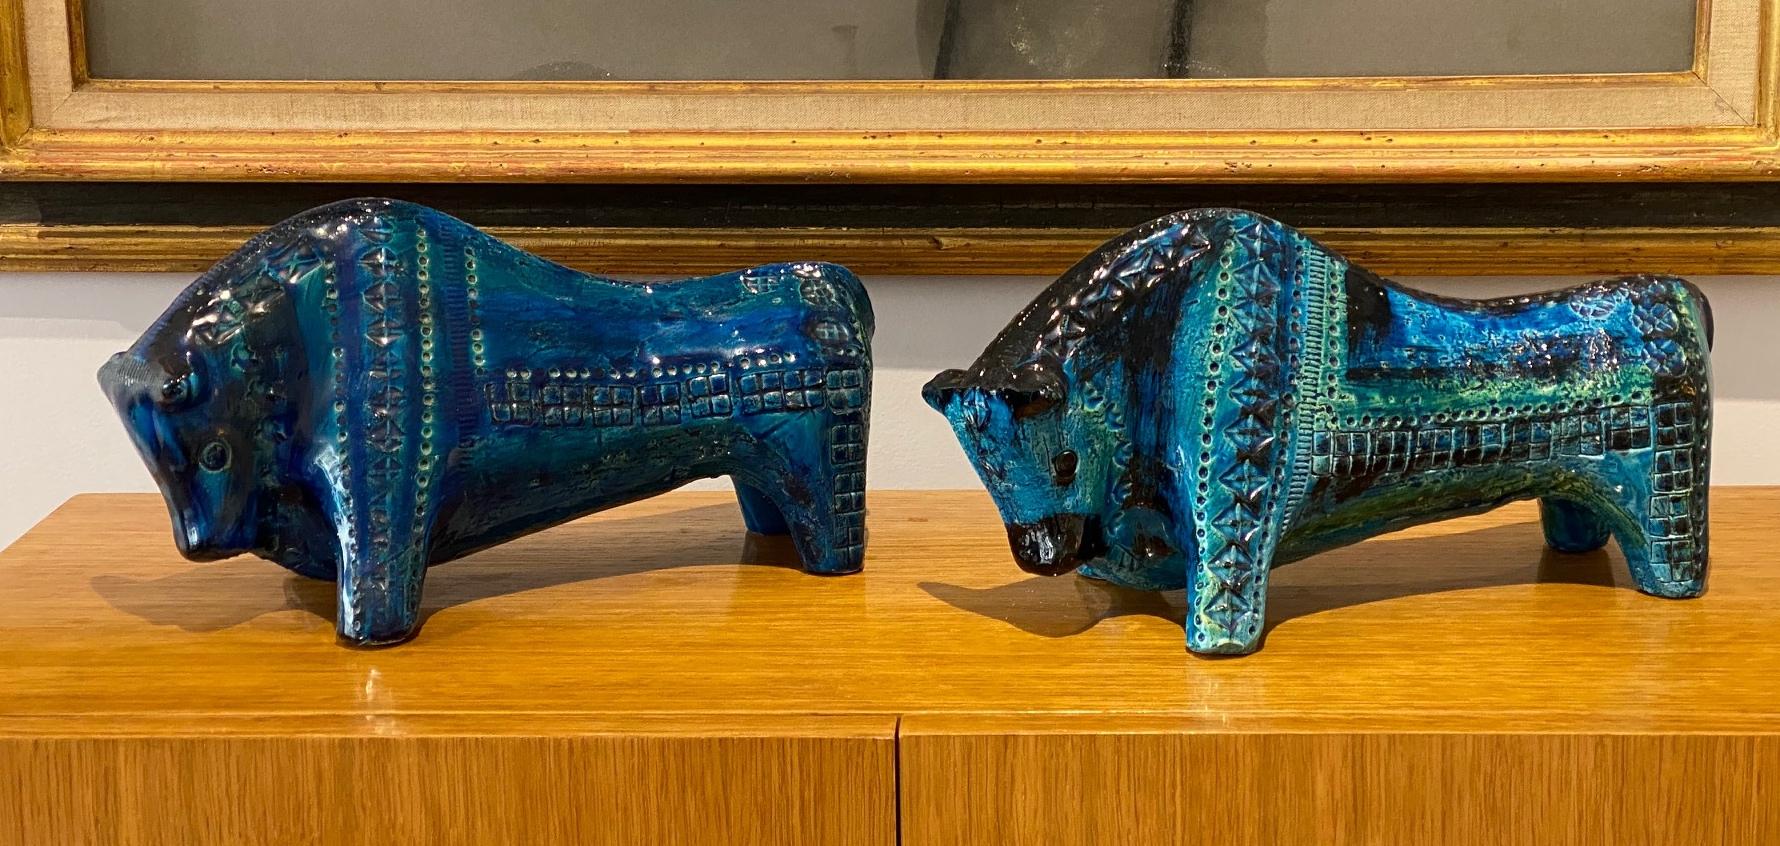 Decorative Bulls midcentury Rimini blue glazed . Designed by Aldo Londi, manufactured by Bitossi Ceramiche / Italy in the 1960s. 
Handcrafted with hand carved geometric design in a glazed vibrant turquoise and cobalt blue. In very good condition.